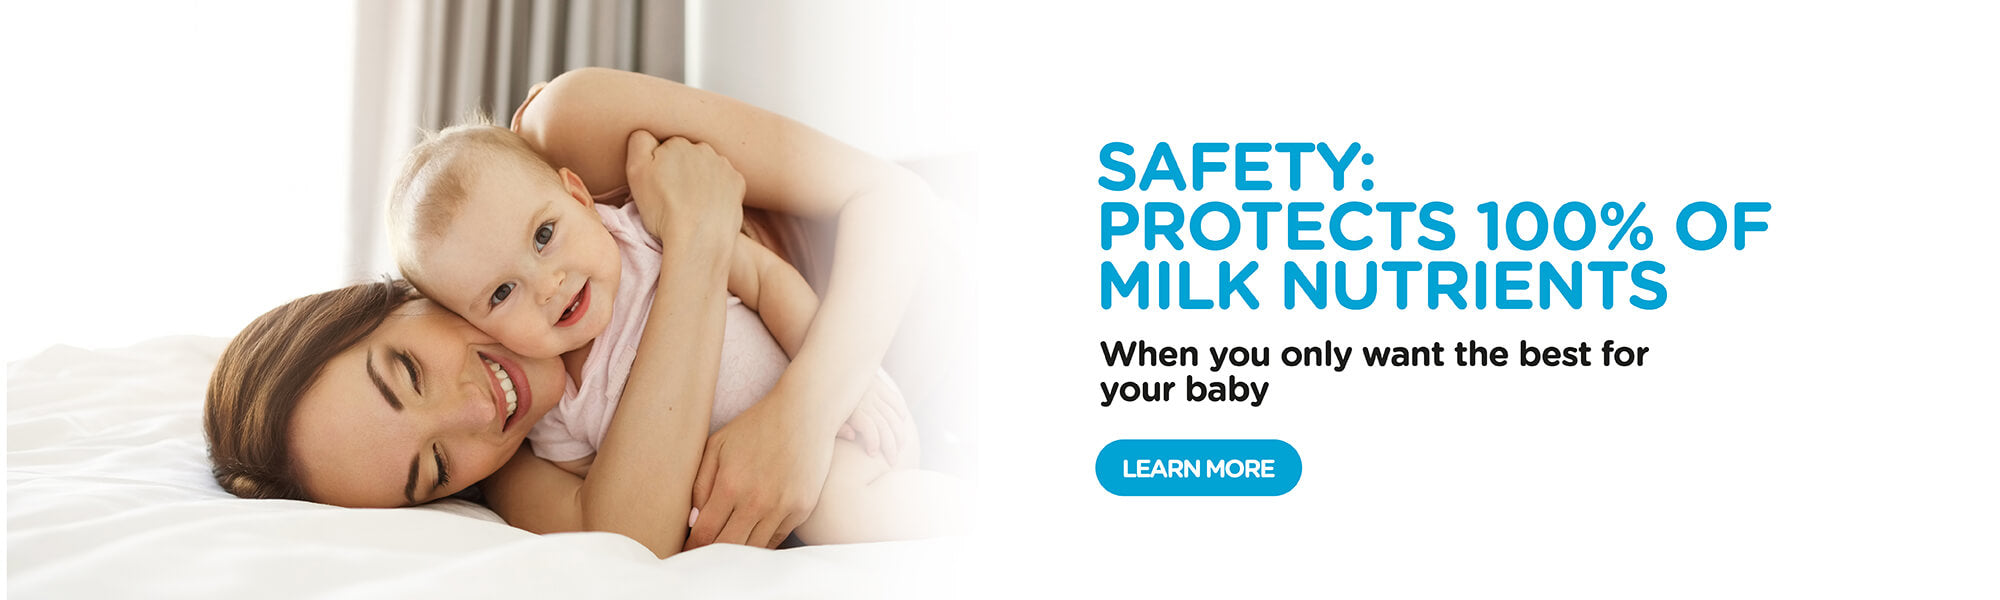 YOOMI ZEN 3S SAFETY: PROTECTS 100% OF MILK NUTRIENTS